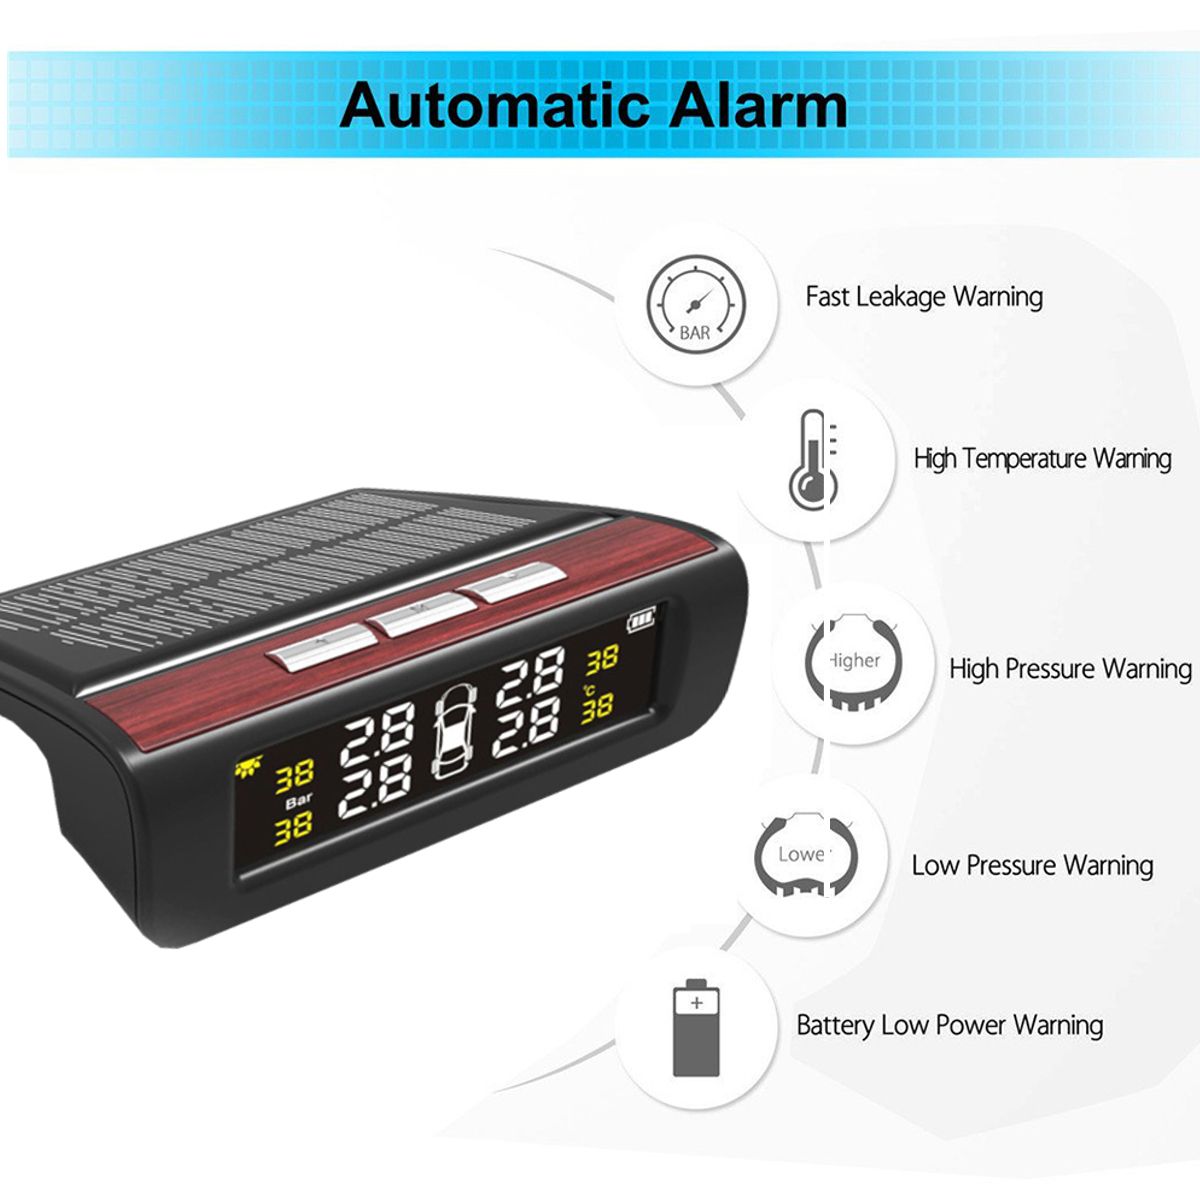 Car-TPMS-Solar-Tire-Pressure-Monitoring-System-External-English-Version-with-Four-Sensors-1713932